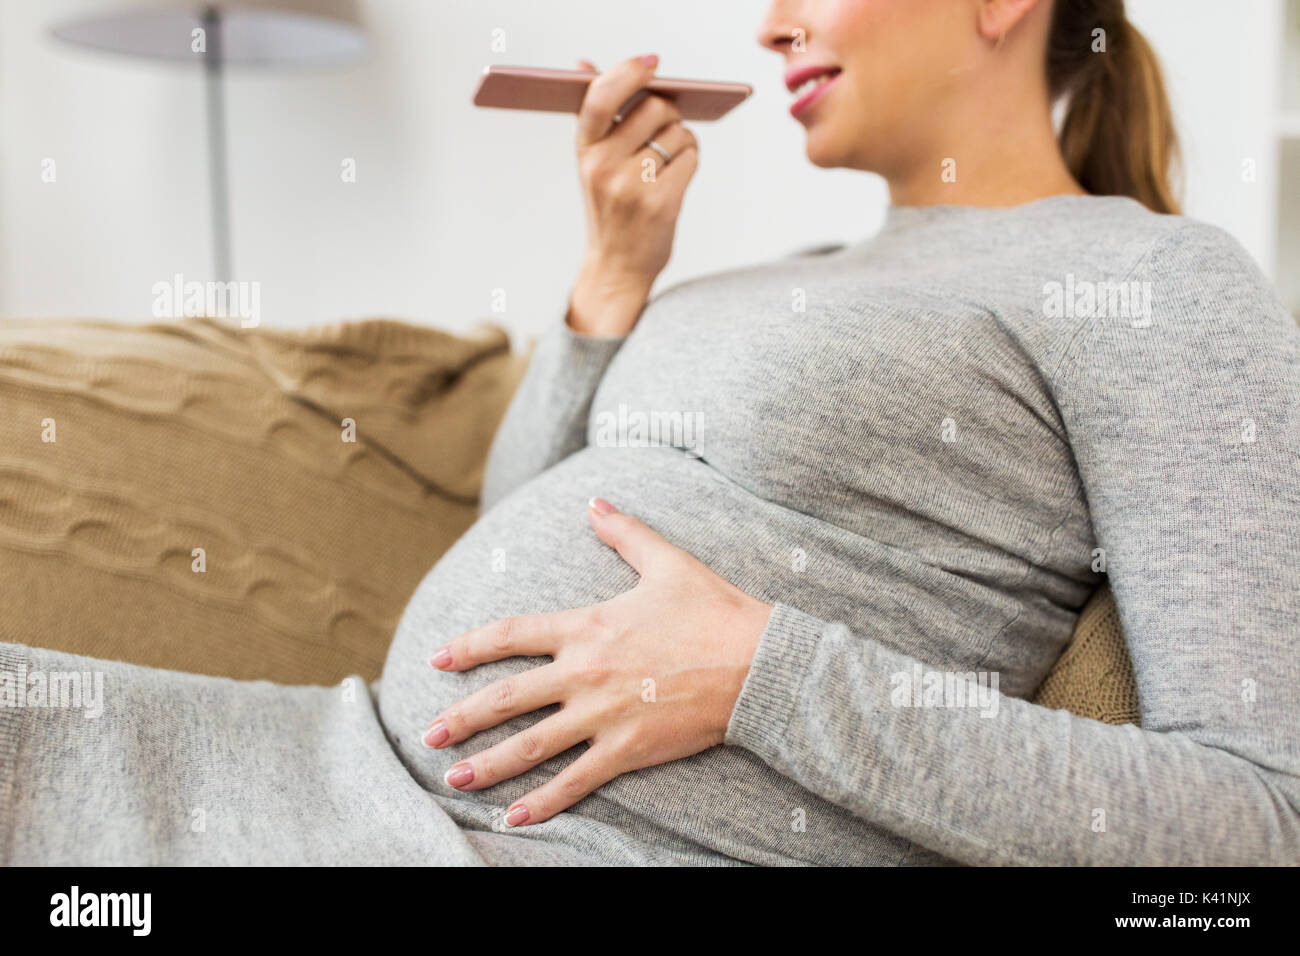 pregnant woman using voice recorder on smartphone Stock Photo